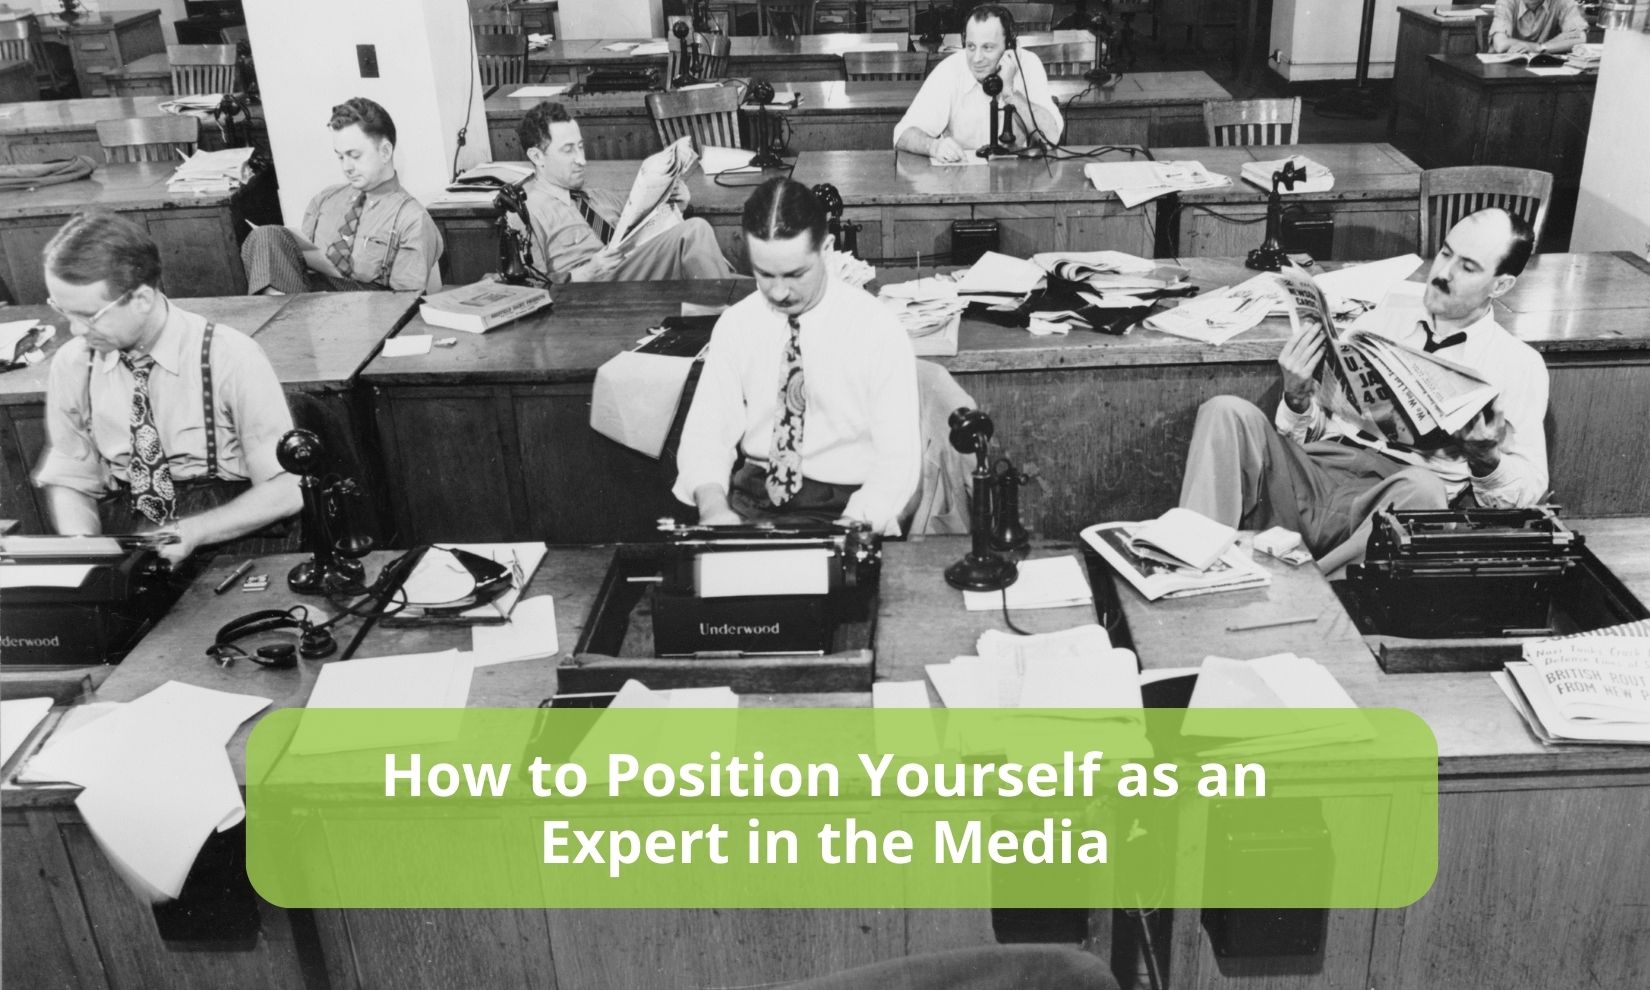 How to Position Yourself as an Expert in the Media